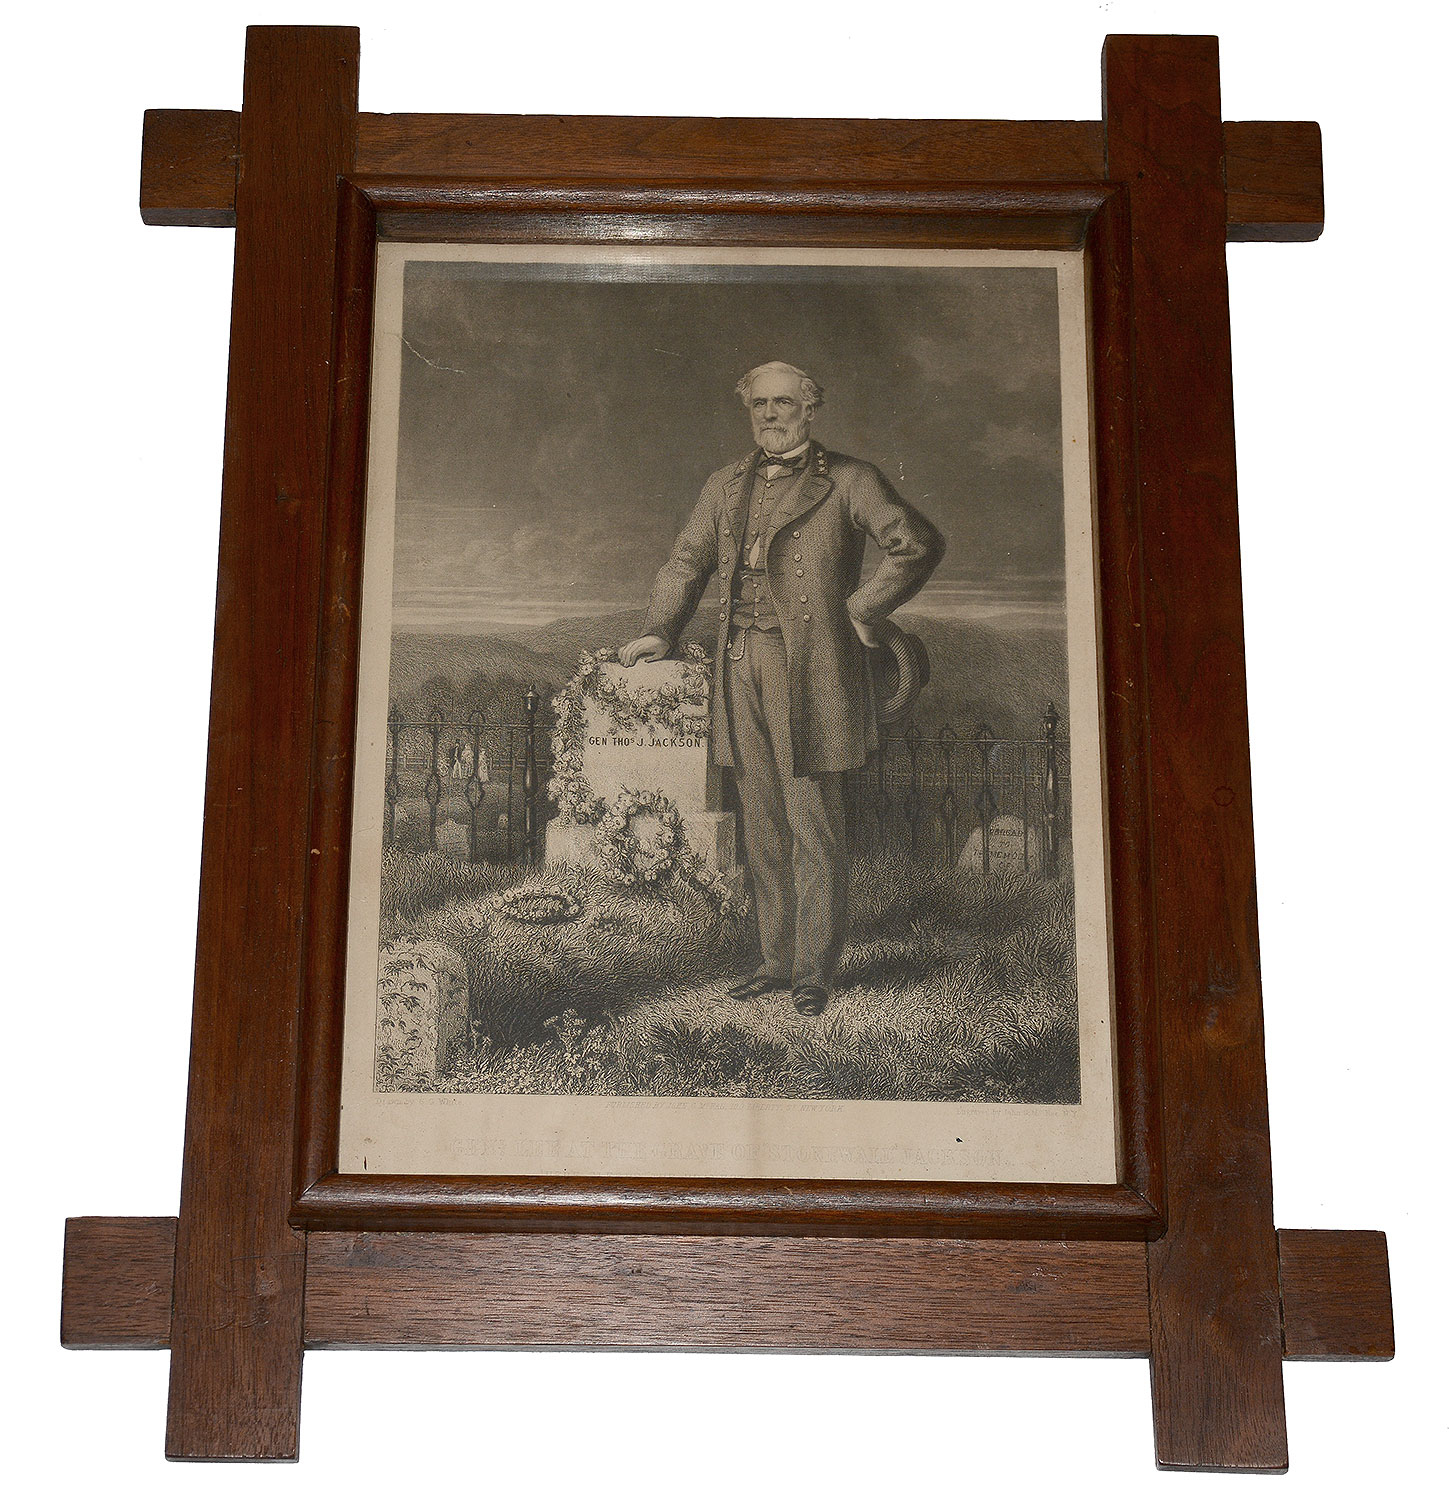 FRAMED LITHOGRAPH ENTITLED “GENL. LEE AT THE GRAVE OF STONEWALL JACKSON.” 